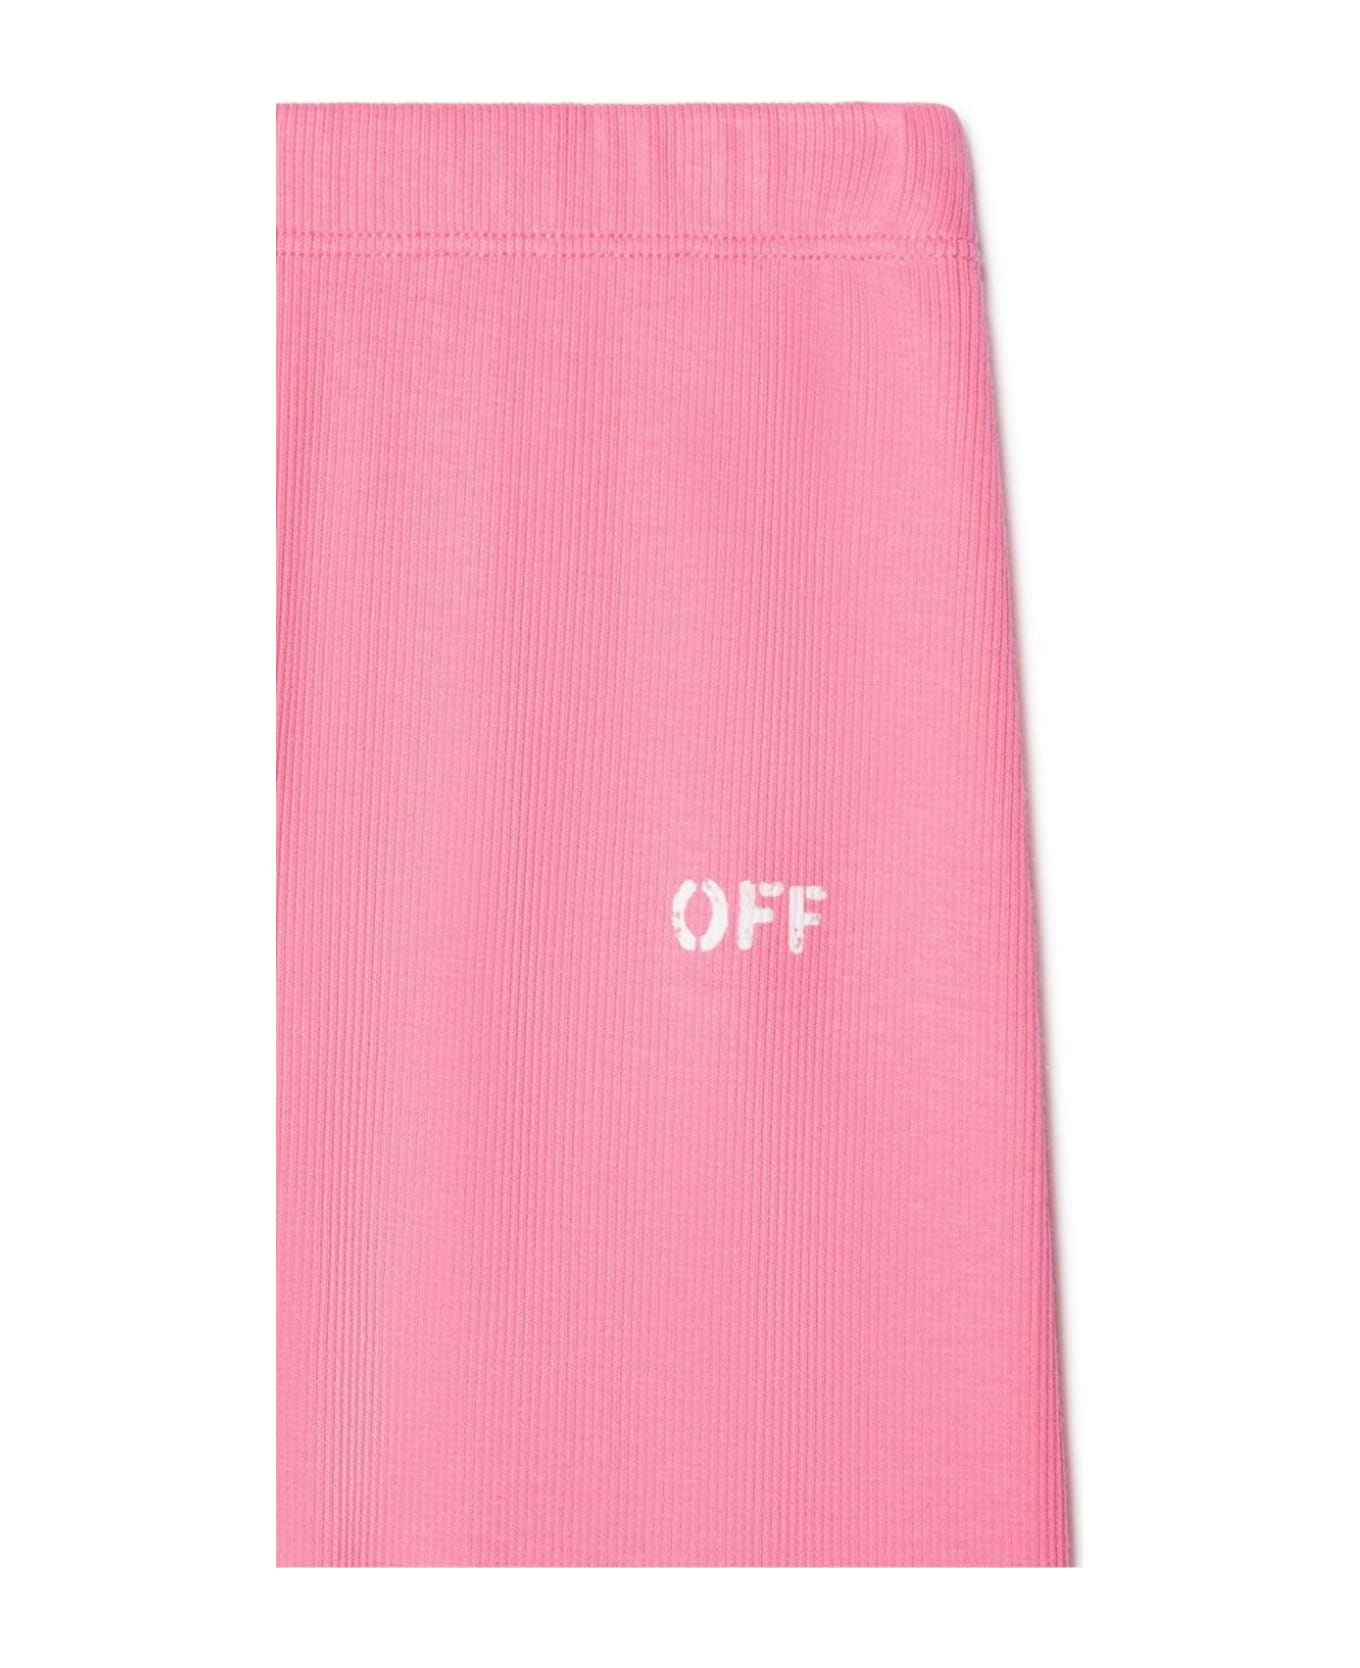 Off-White Off White Shorts Pink - Pink